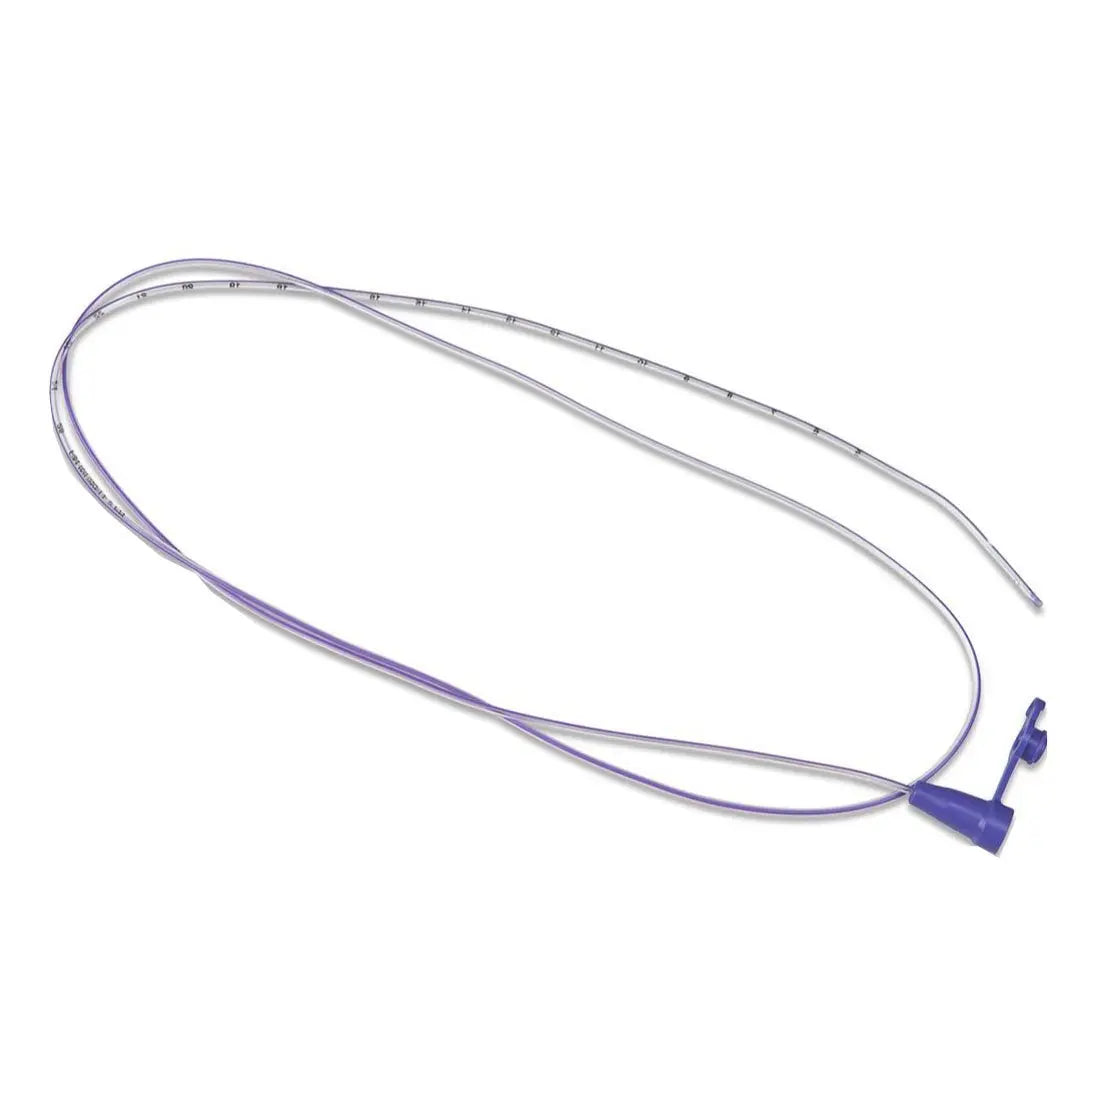 KND 461503 CA/10 ARGYLE INDWELL PVC FEEDING TUBE, W/ SAFE ENTERAL CONNECTION, 5FR (1.7MM), 36IN (91CM) LENGTH